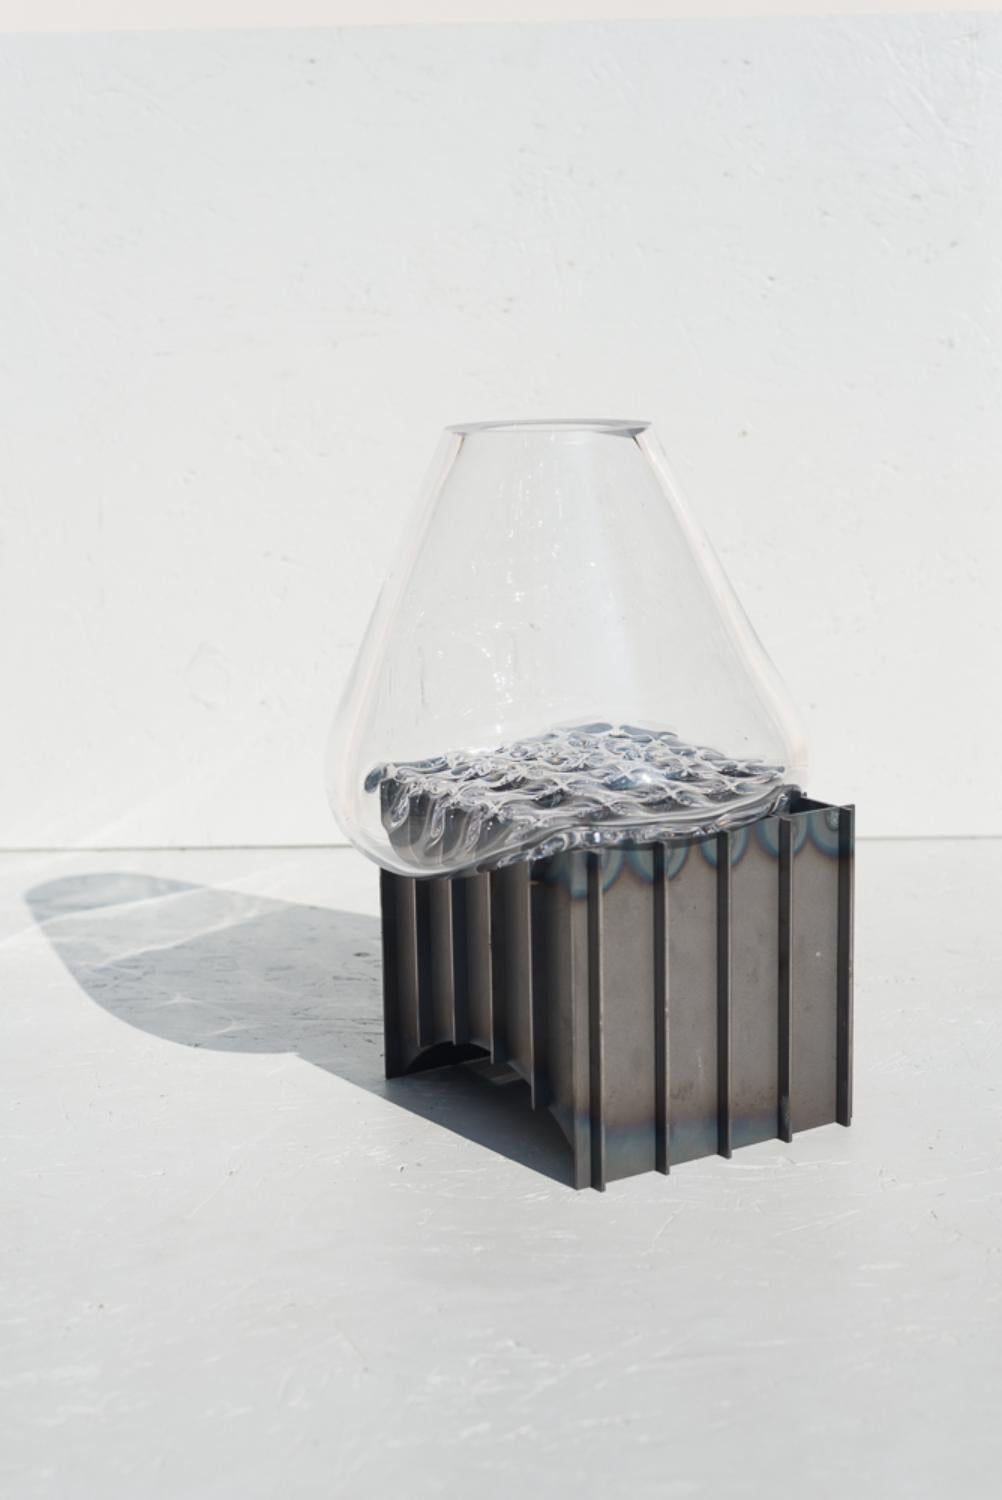 Set Of 2 Clear Grid Table Vase by Studio Thier & van Daalen
Dimensions: W 30 x D 30 x H 35cm
Materials: Steel, Glass

The studio was keen to find a way to display the fluidity of glass. Therefore they sought the contrast between the industrial